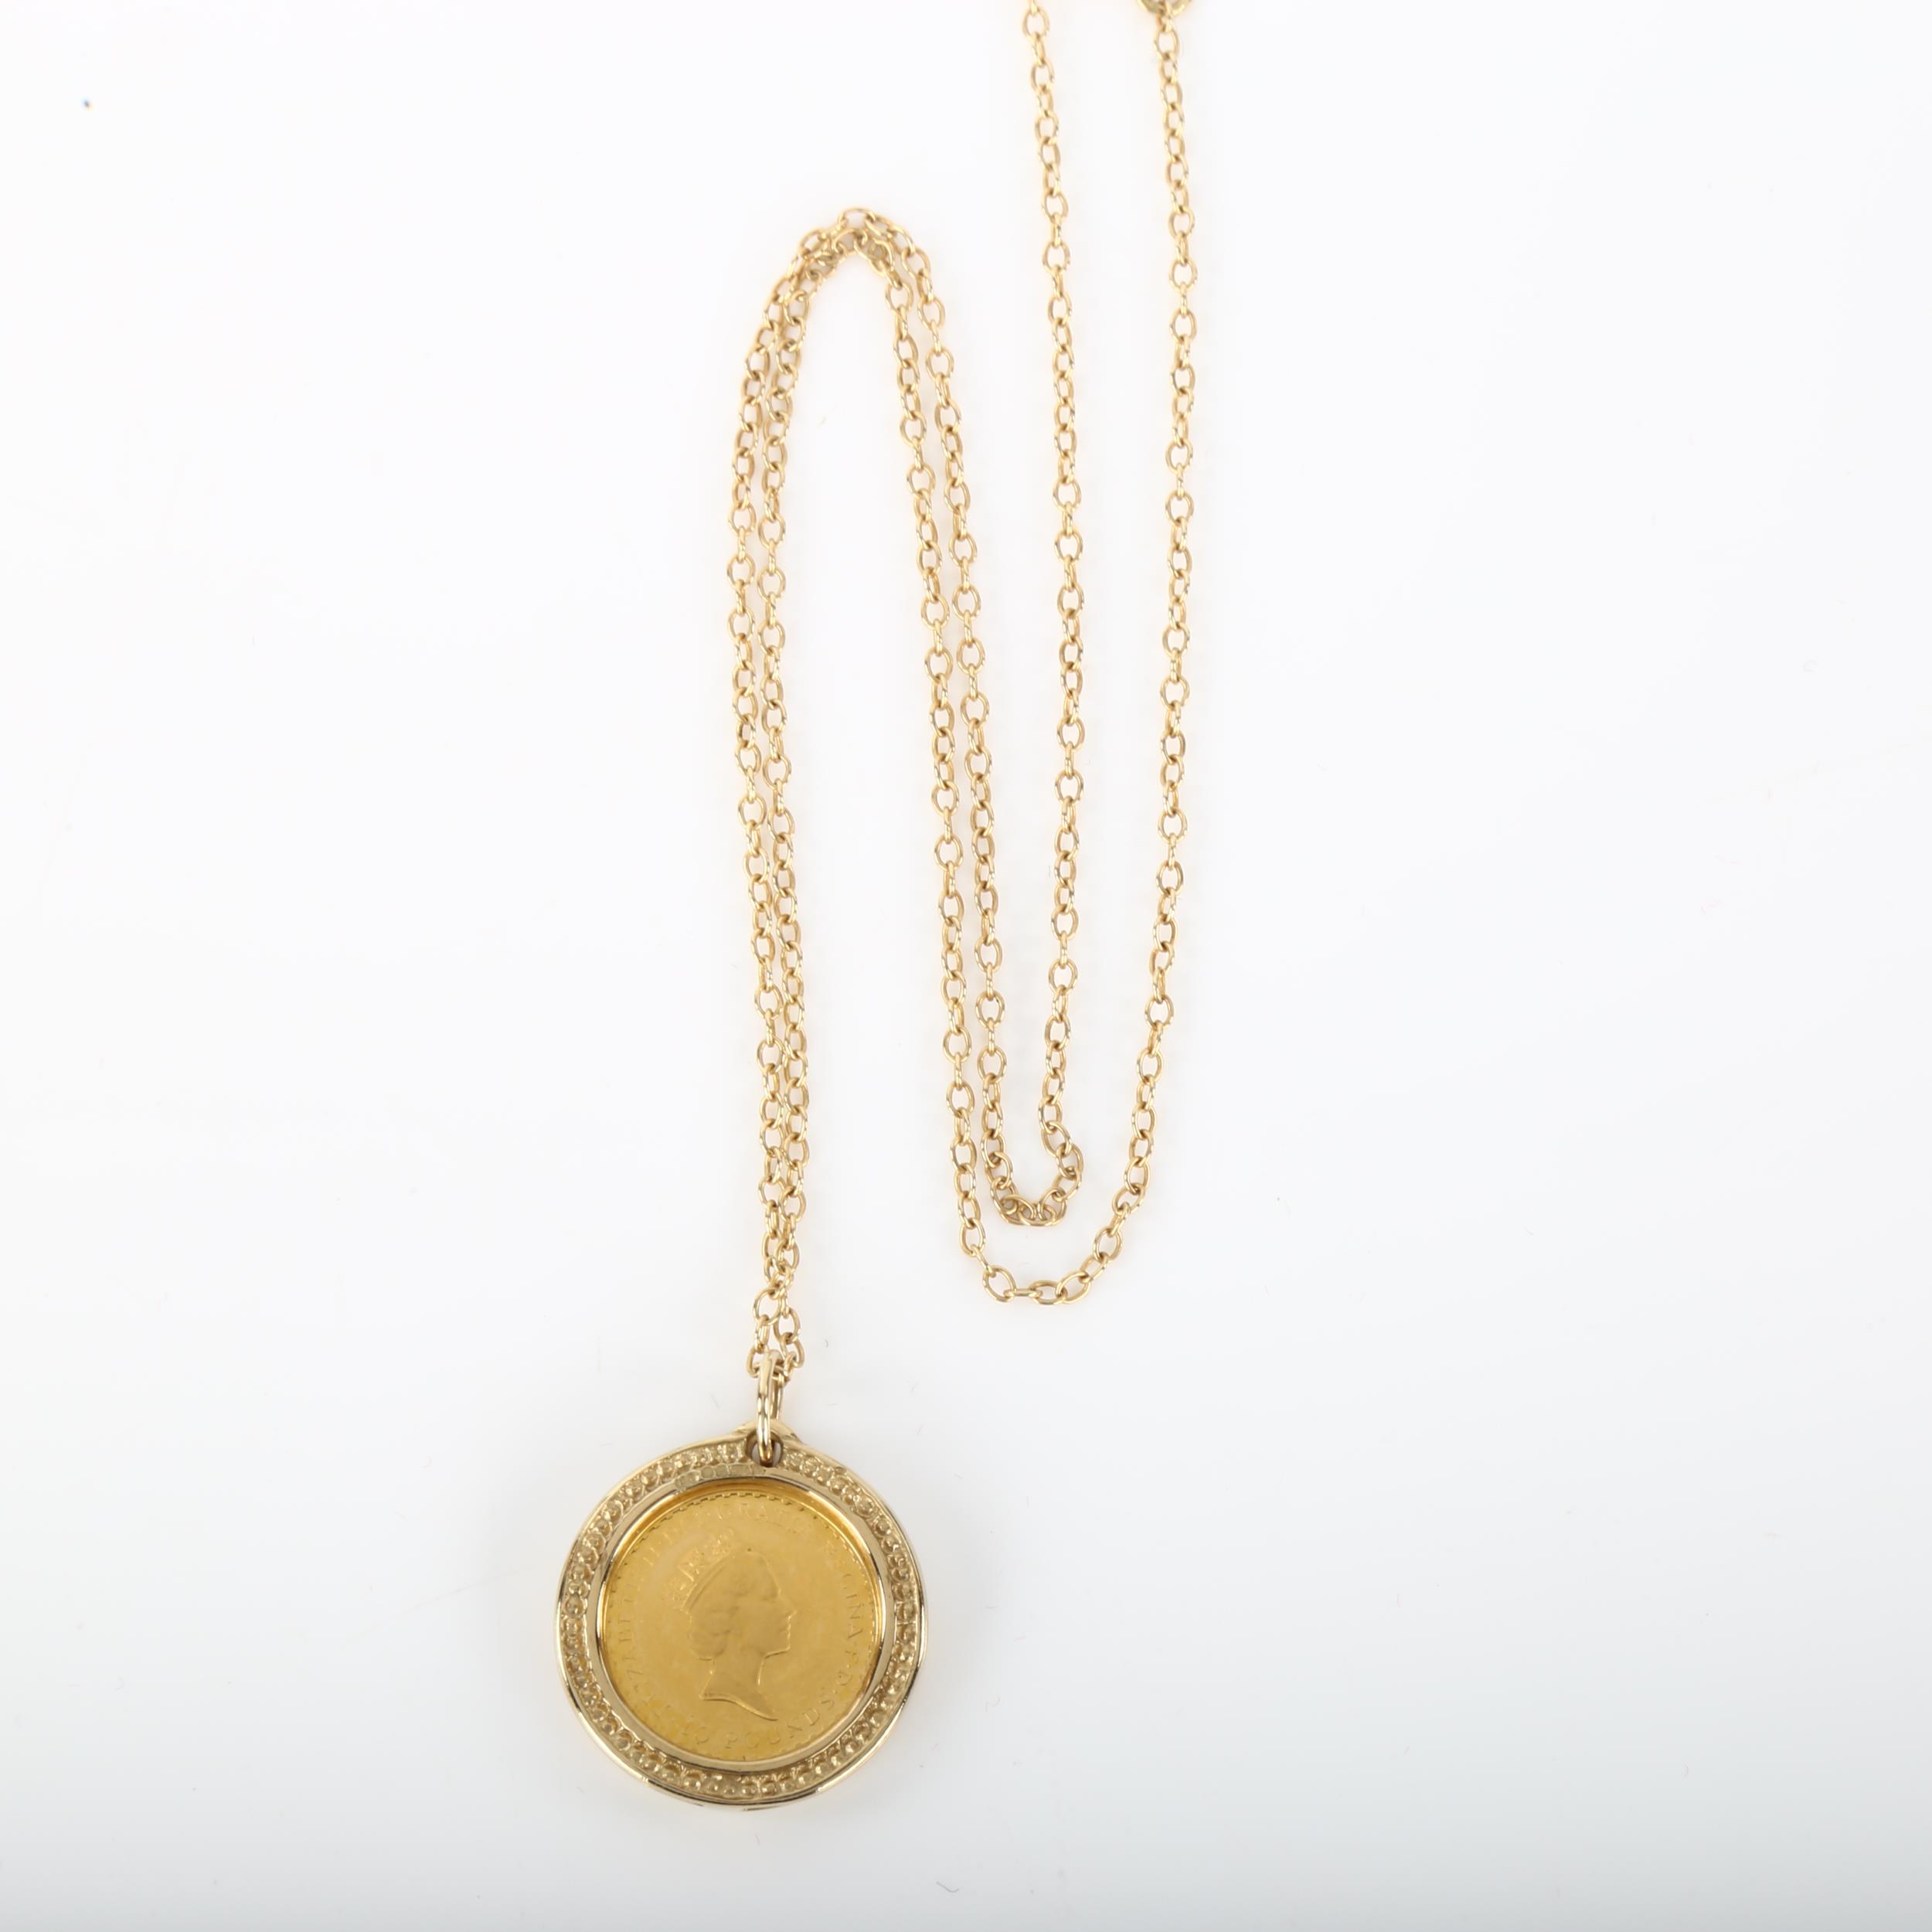 A 1997 Britannia gold proof £10 coin pendant necklace, chain length 44cm, 8.1g, limited edition - Image 3 of 4